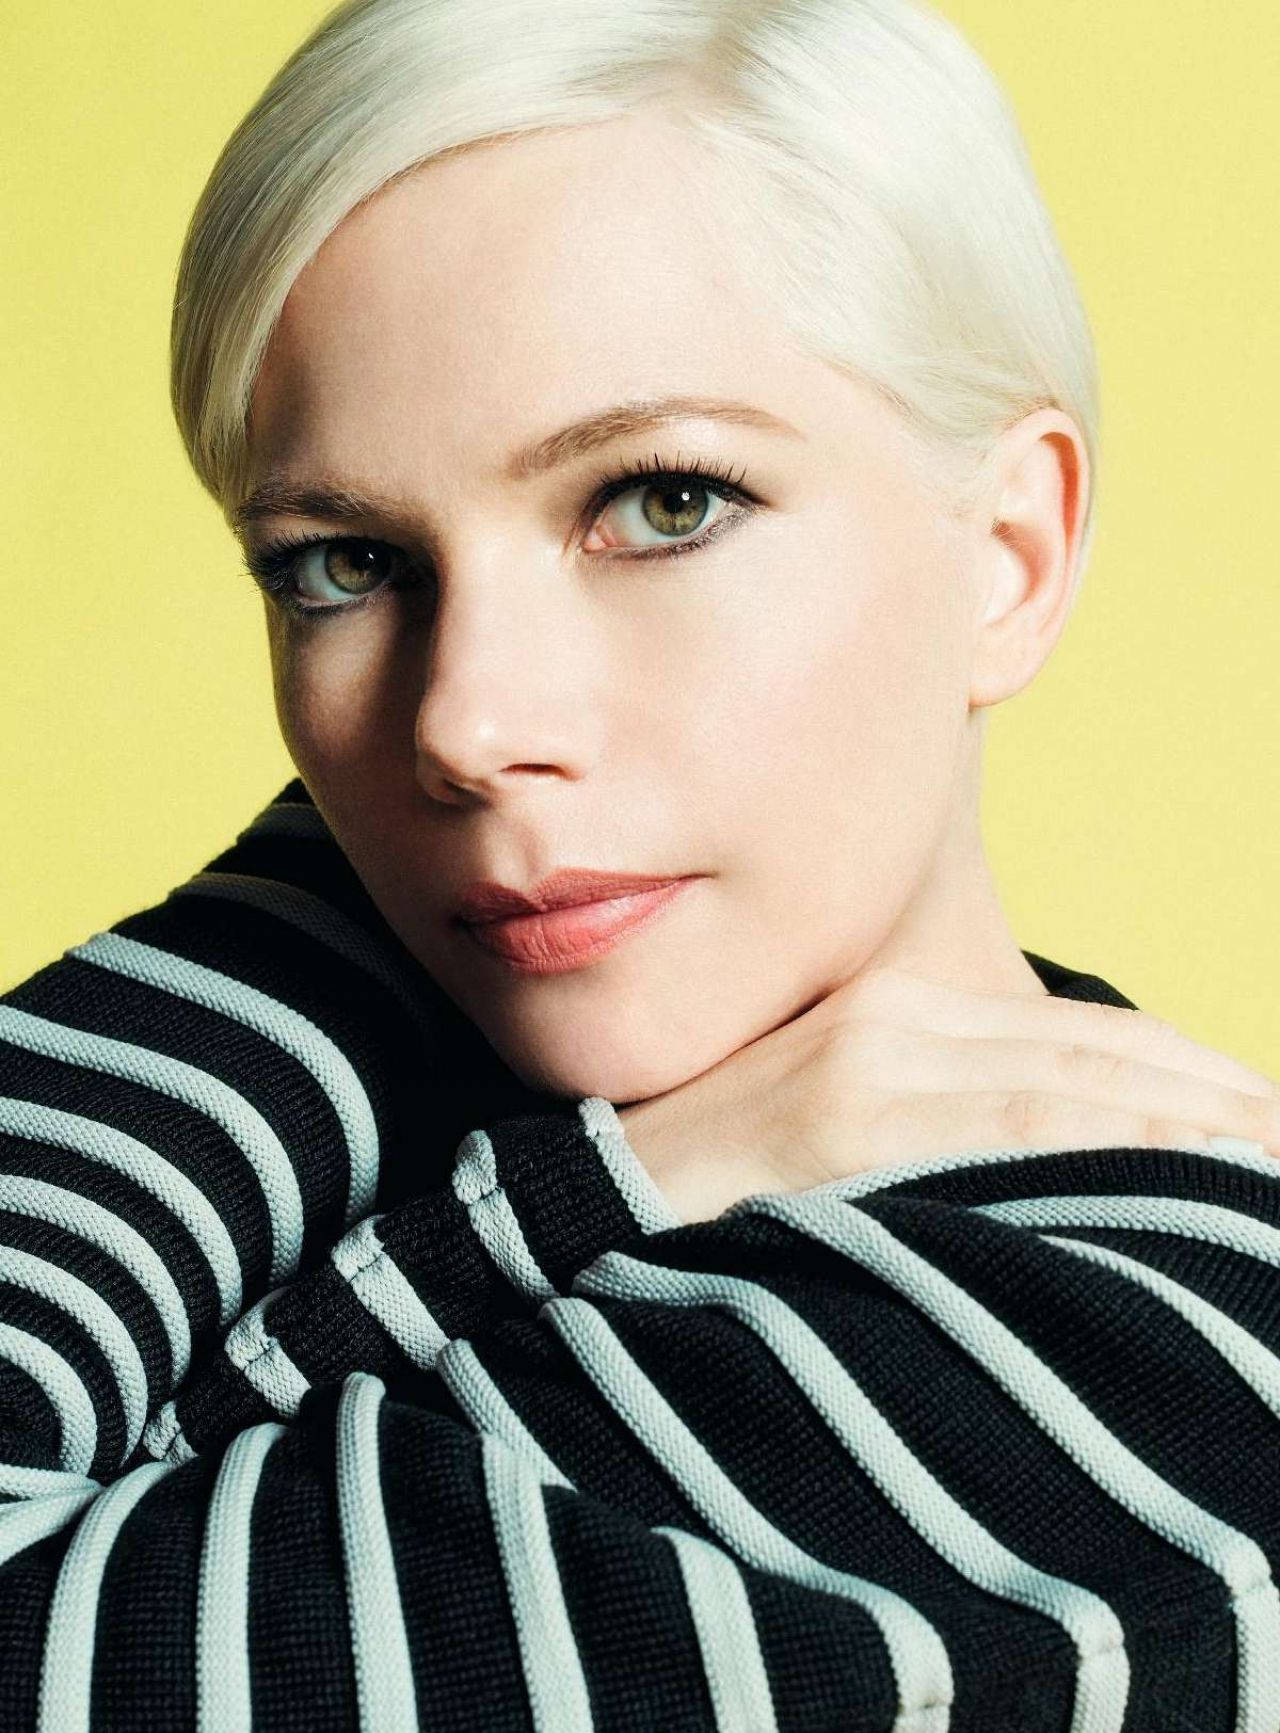 American Actress Michelle Williams In Stripe Shirt Wallpaper